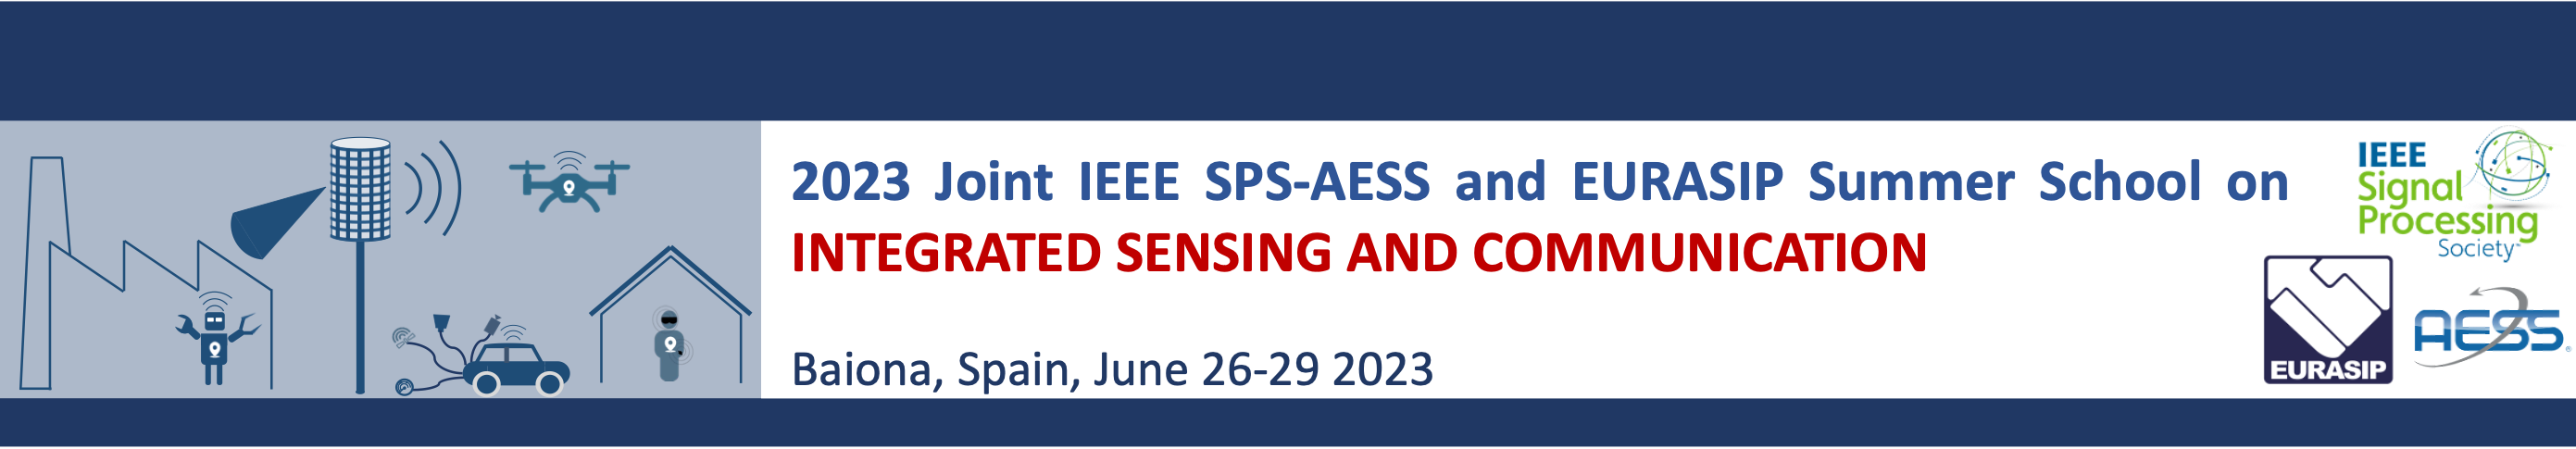 2023 Joint IEEE SPS-AESS and EURASIP Summer School on Integrated Sensing and Communication